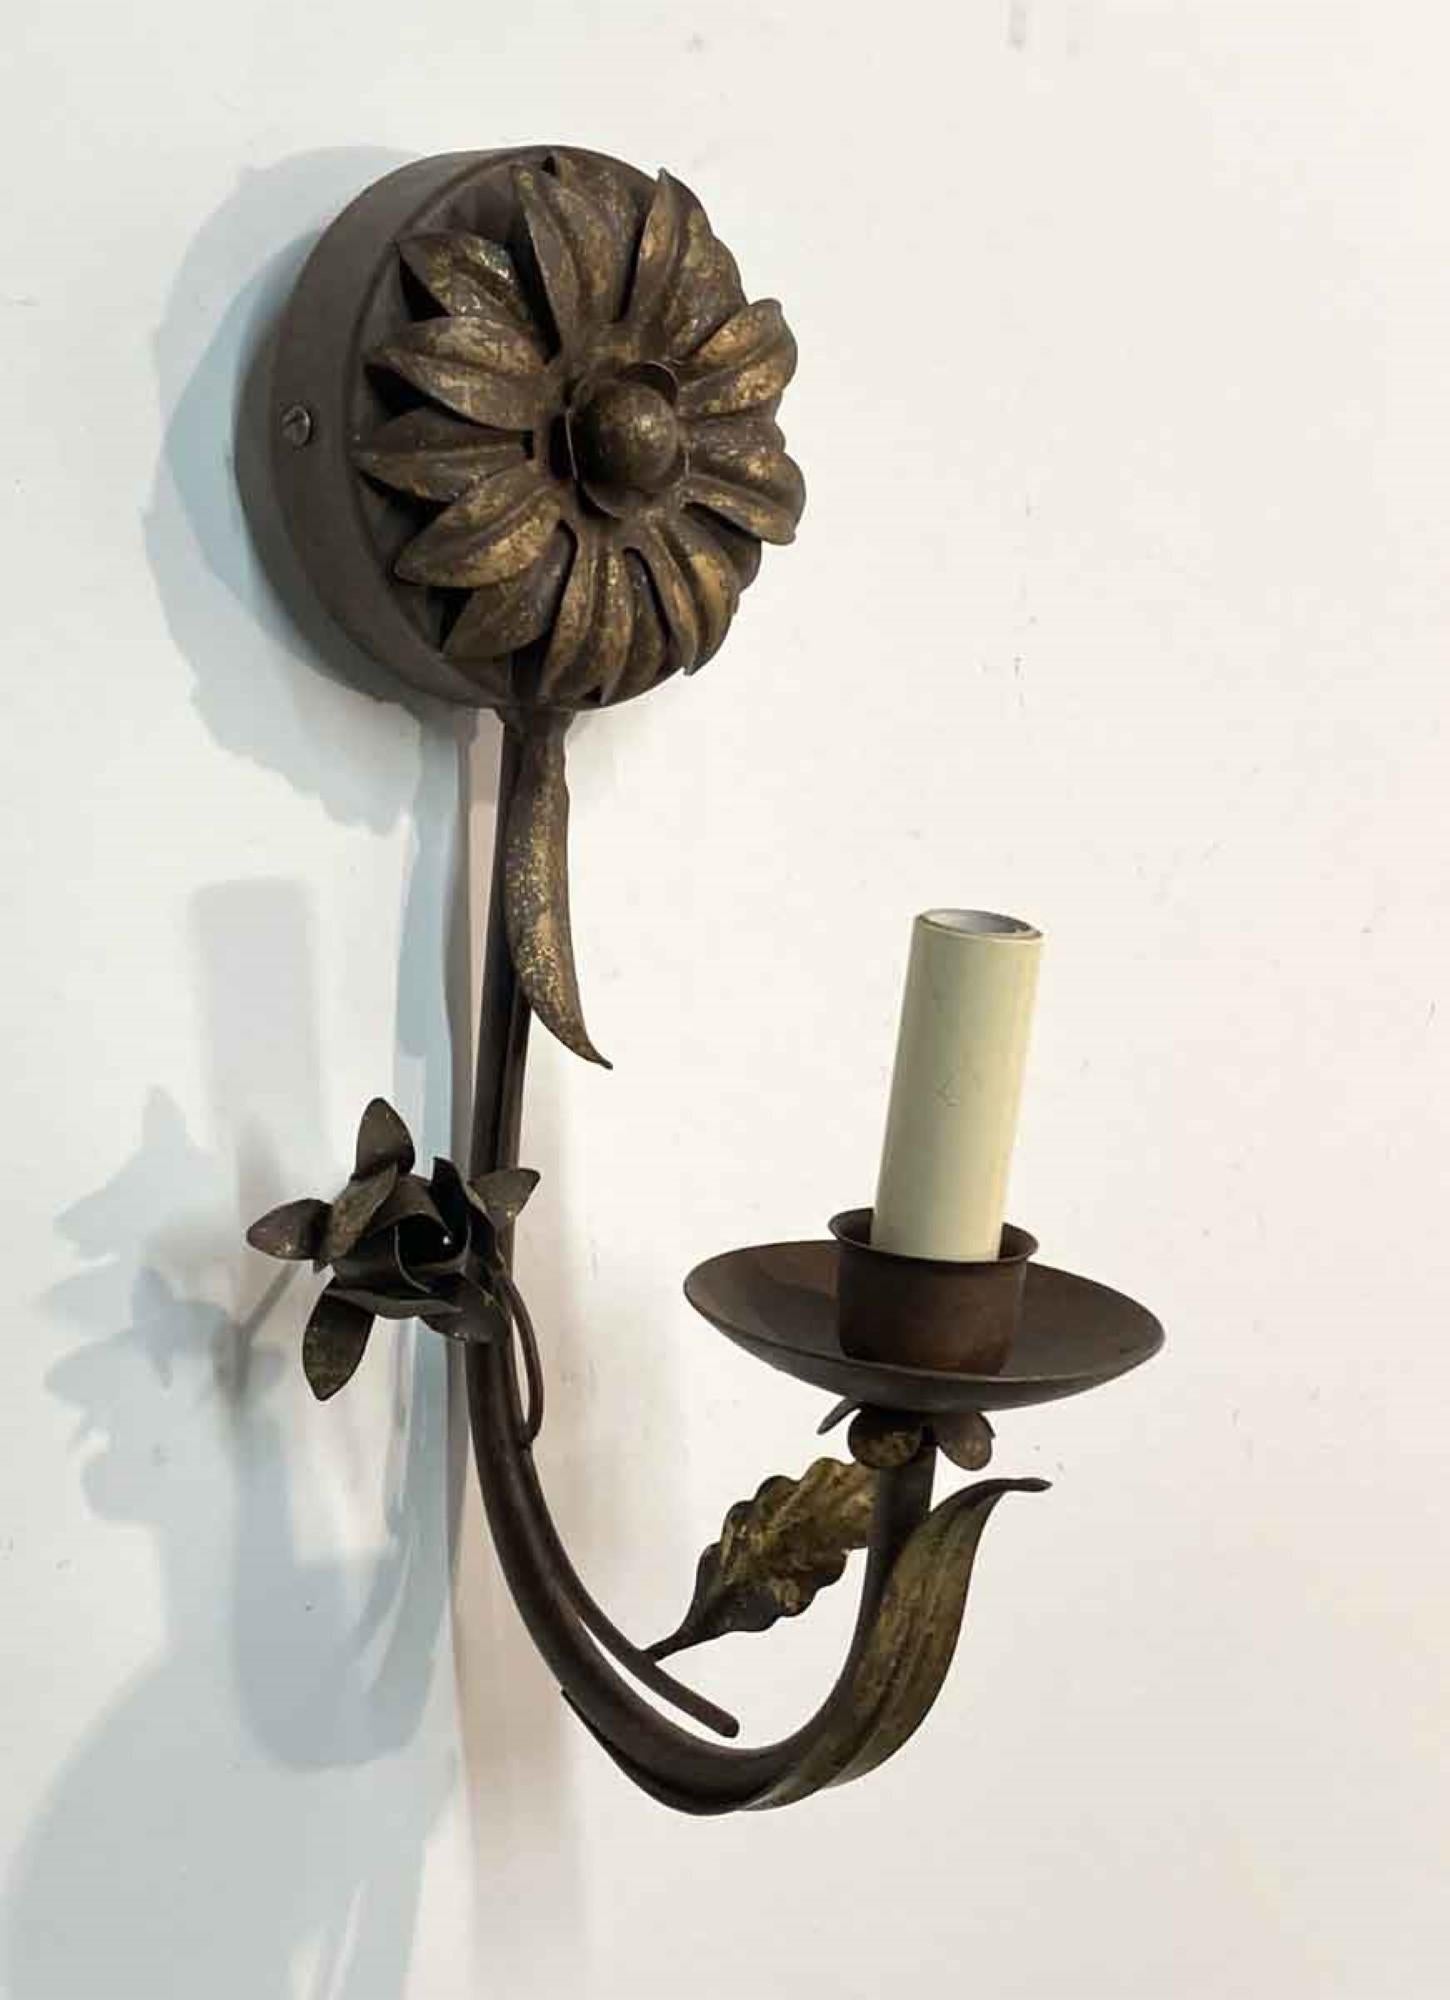 2000s Italian Florentine sunflower style wall sconce. Hand wrought iron with a single arm. Done in a brown tone and gold gilt finish. This light takes one 60 W candelabra bulb. Small quantity available at time of posting. Priced each. This can be